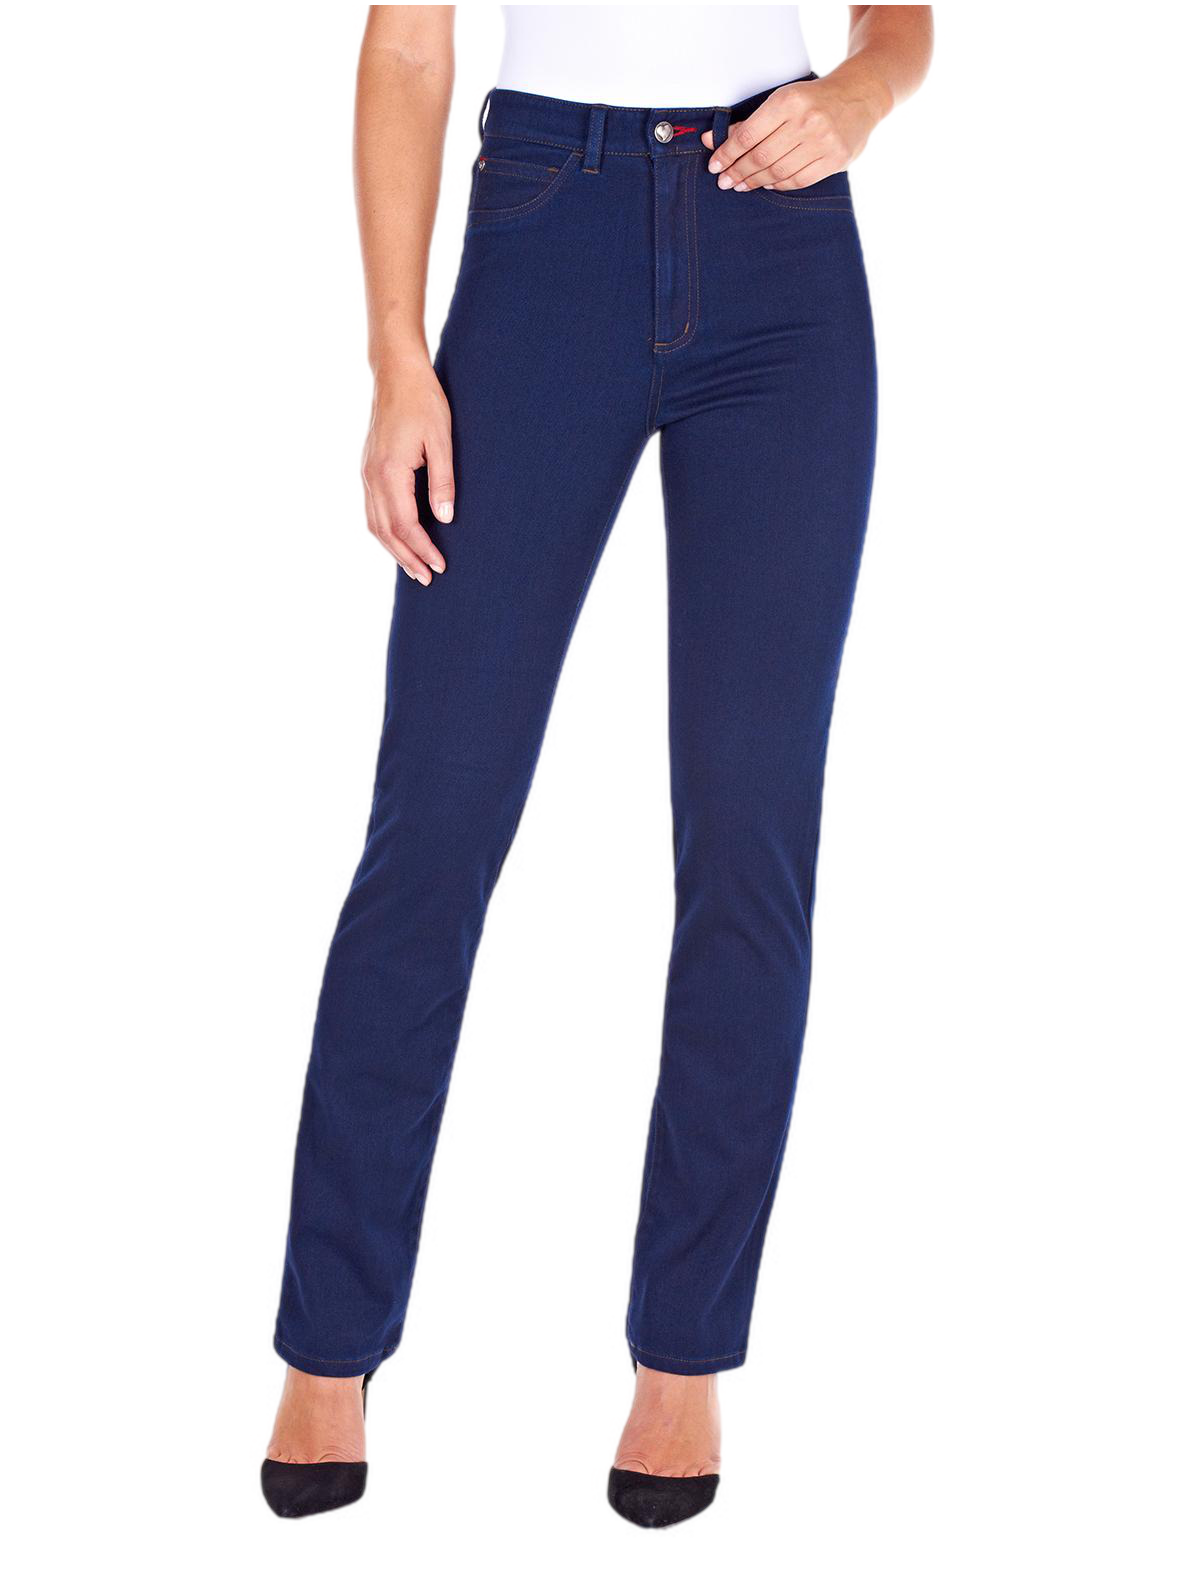 French Dressing Jeans Pull-On Slim Jegging Style 2416214 LOVE